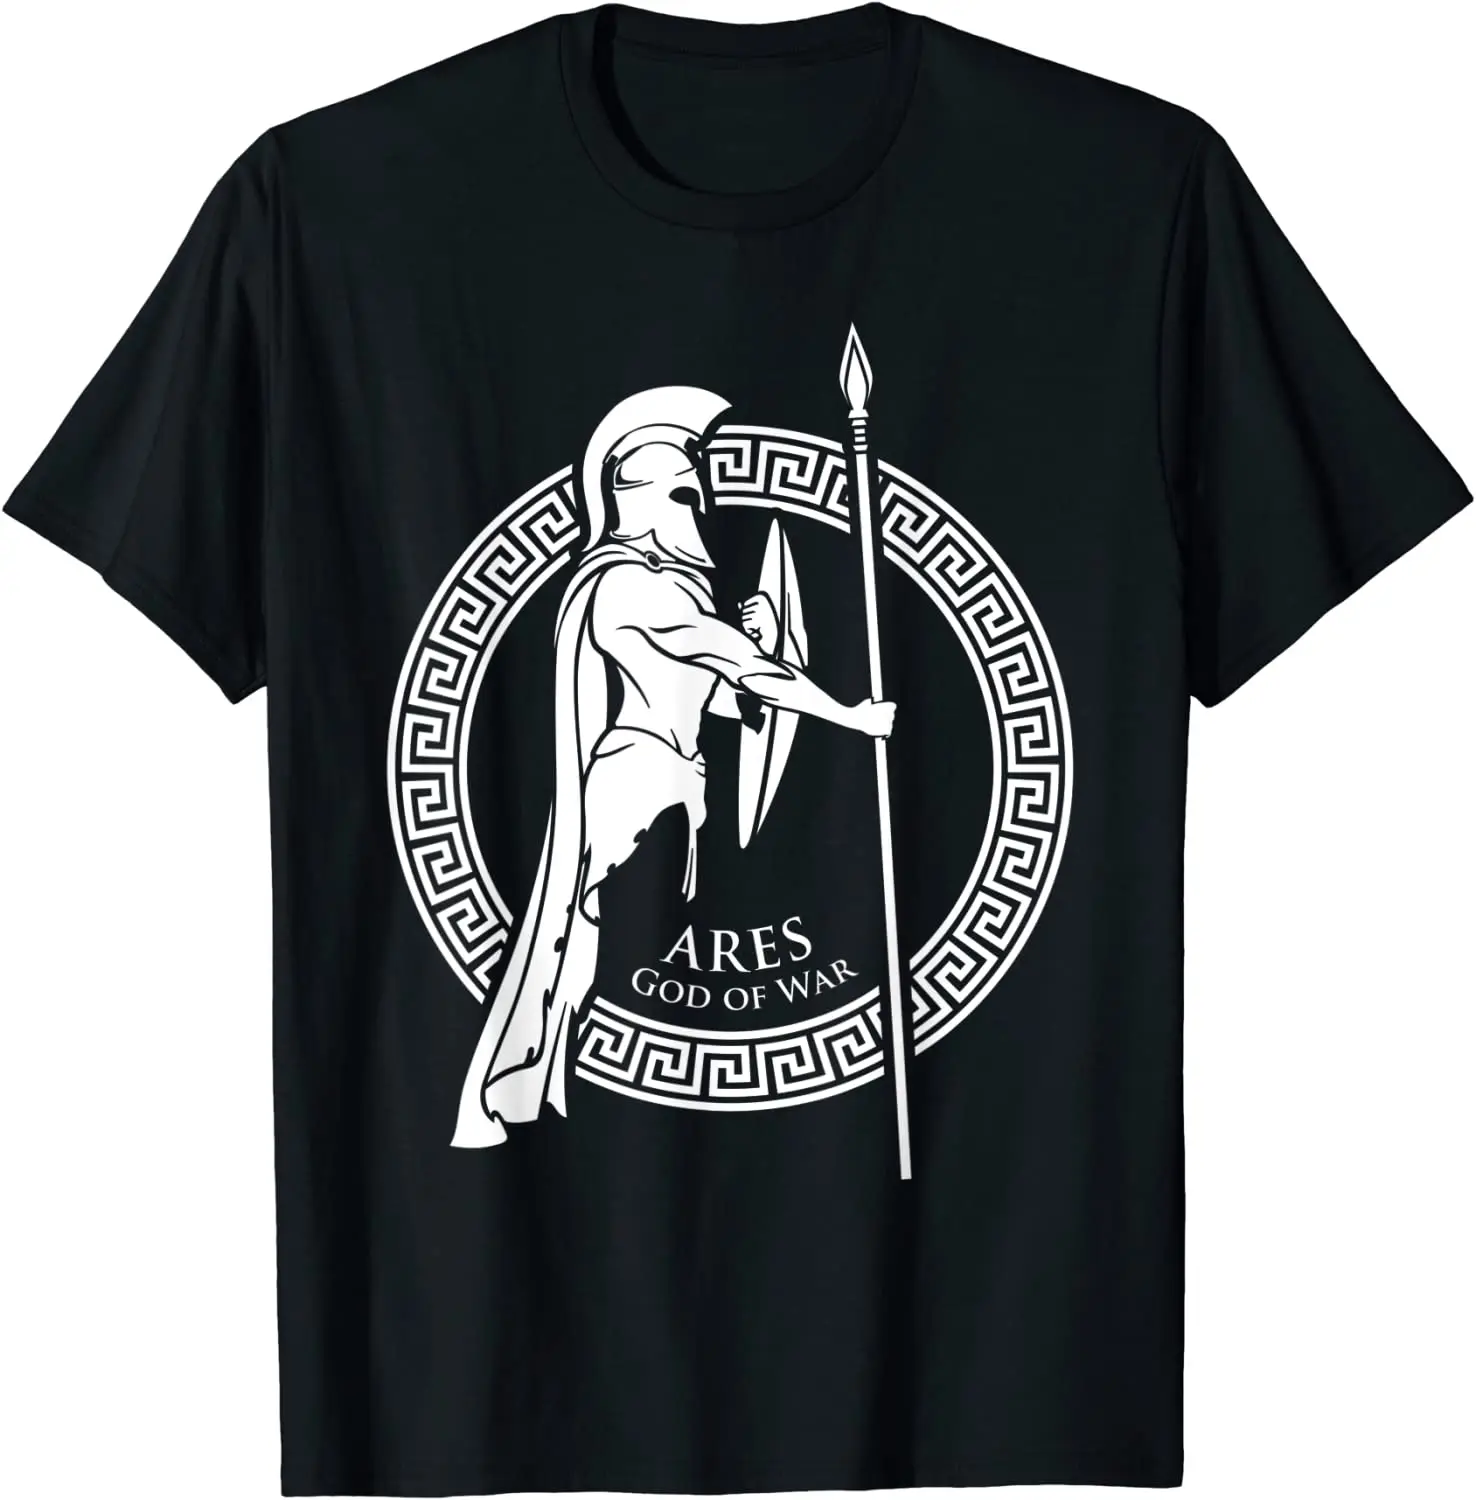 

Greek Mythology Shirts Ancient Greece History Lovers of Ares Men T-Shirt Short Sleeve Casual Cotton O-Neck Summer T Shirts